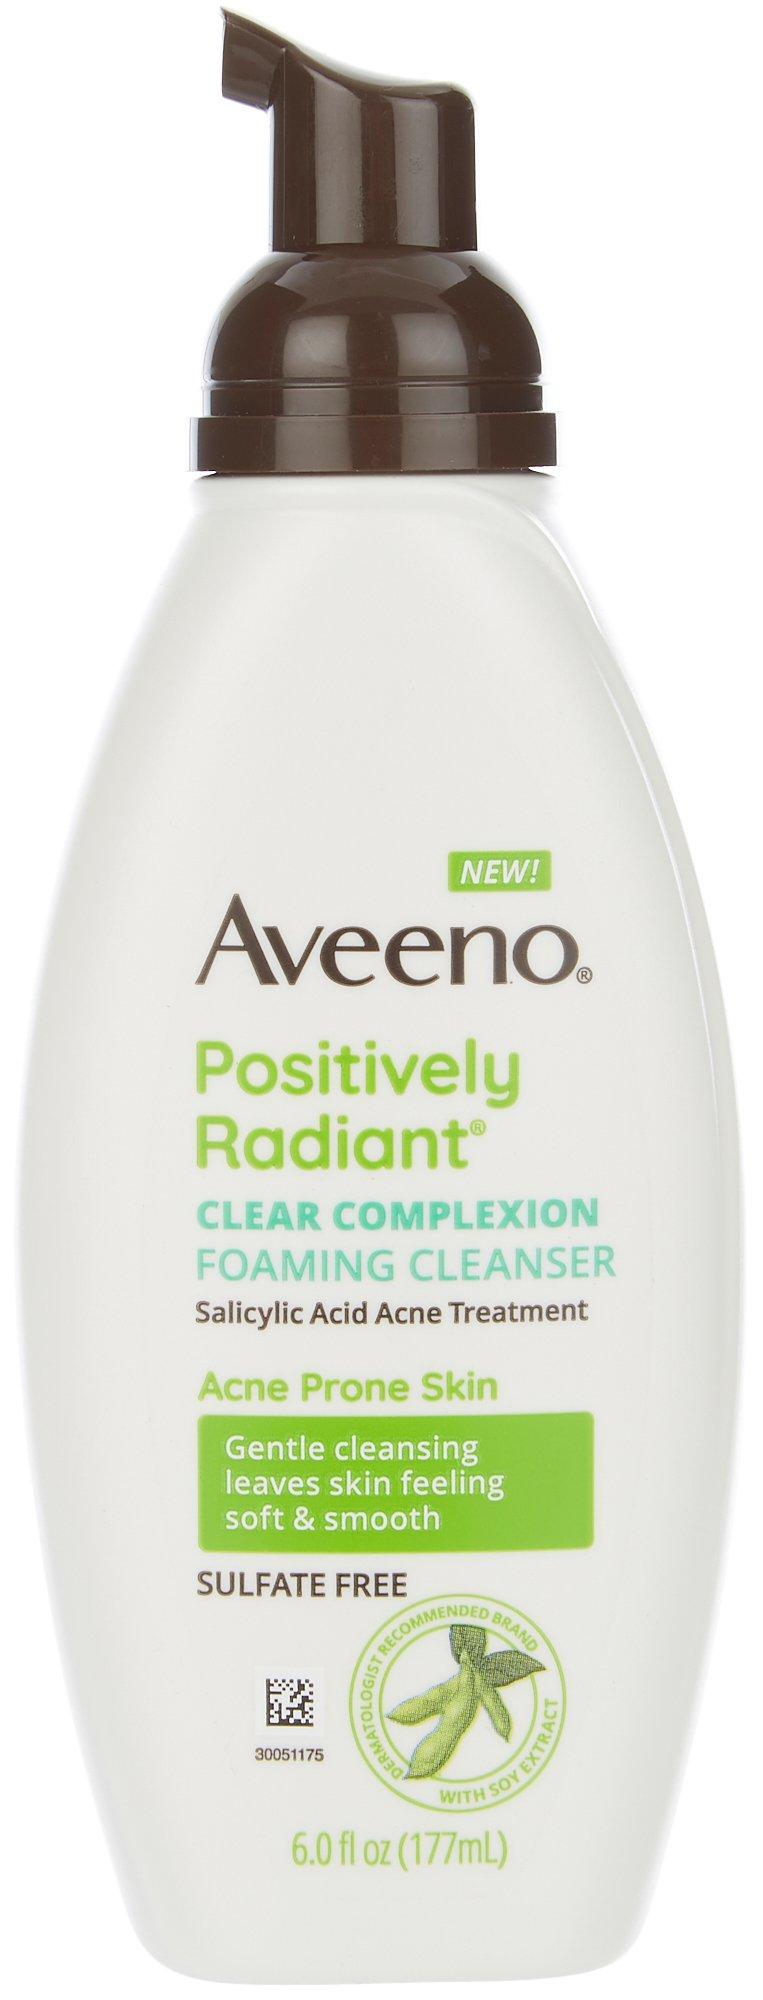 Positively Radiant® Clear Complexion Foaming Salicylic Acid